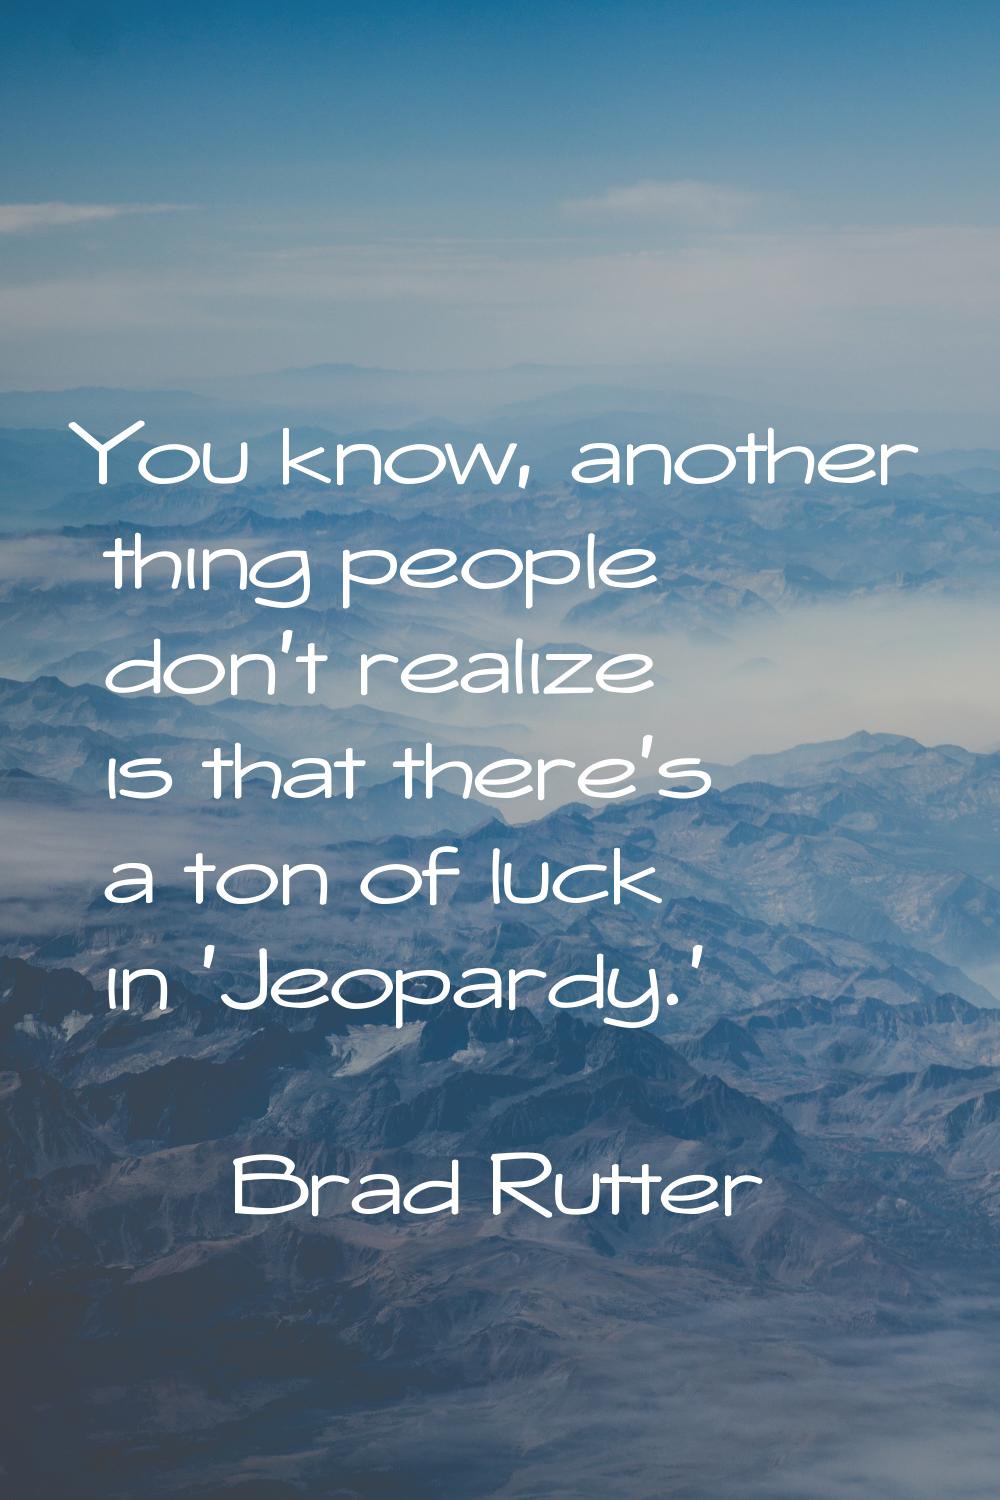 You know, another thing people don't realize is that there's a ton of luck in 'Jeopardy.'